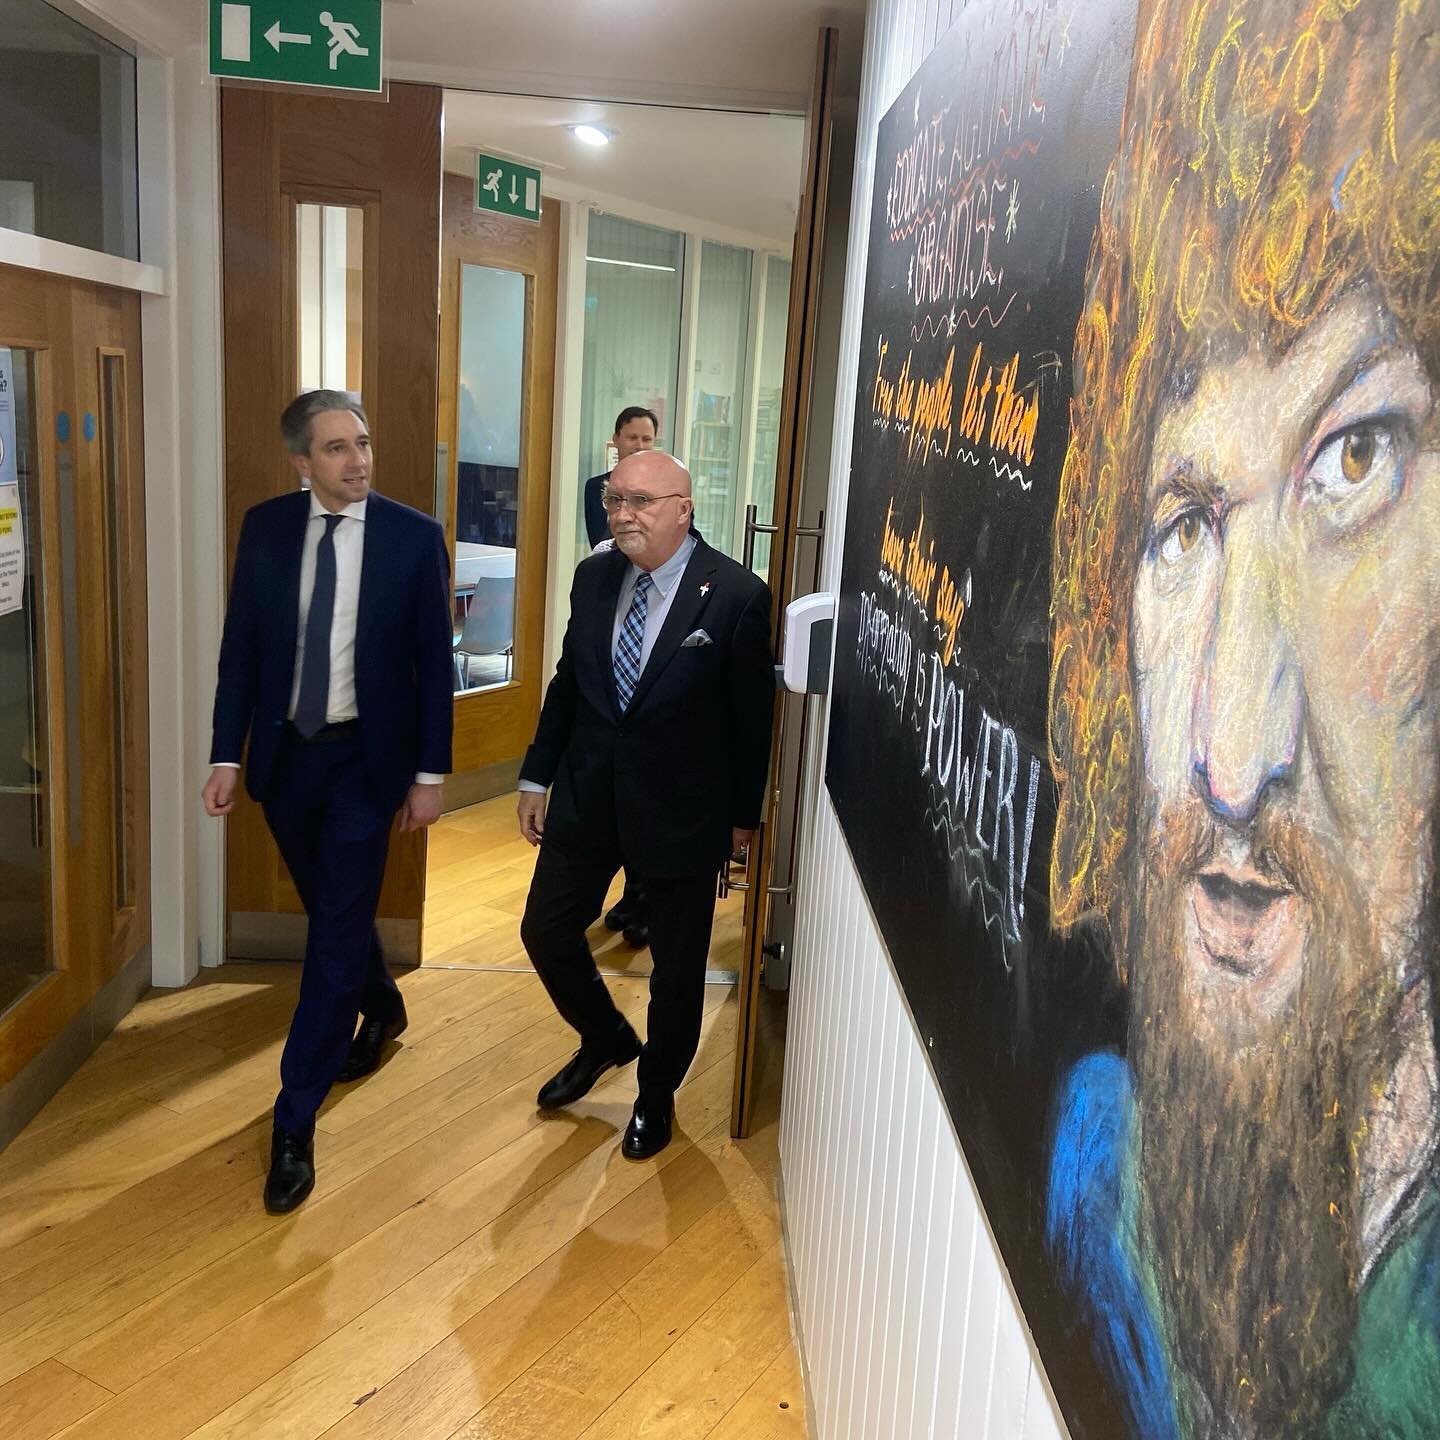 Taoiseach Simon Harris called in to wish @theduncairn a happy 10th birthday today. He praised our work and that of 174 Trust staff and volunteers who work tirelessly for the local community in north Belfast. 

During the meeting we spoke about the im